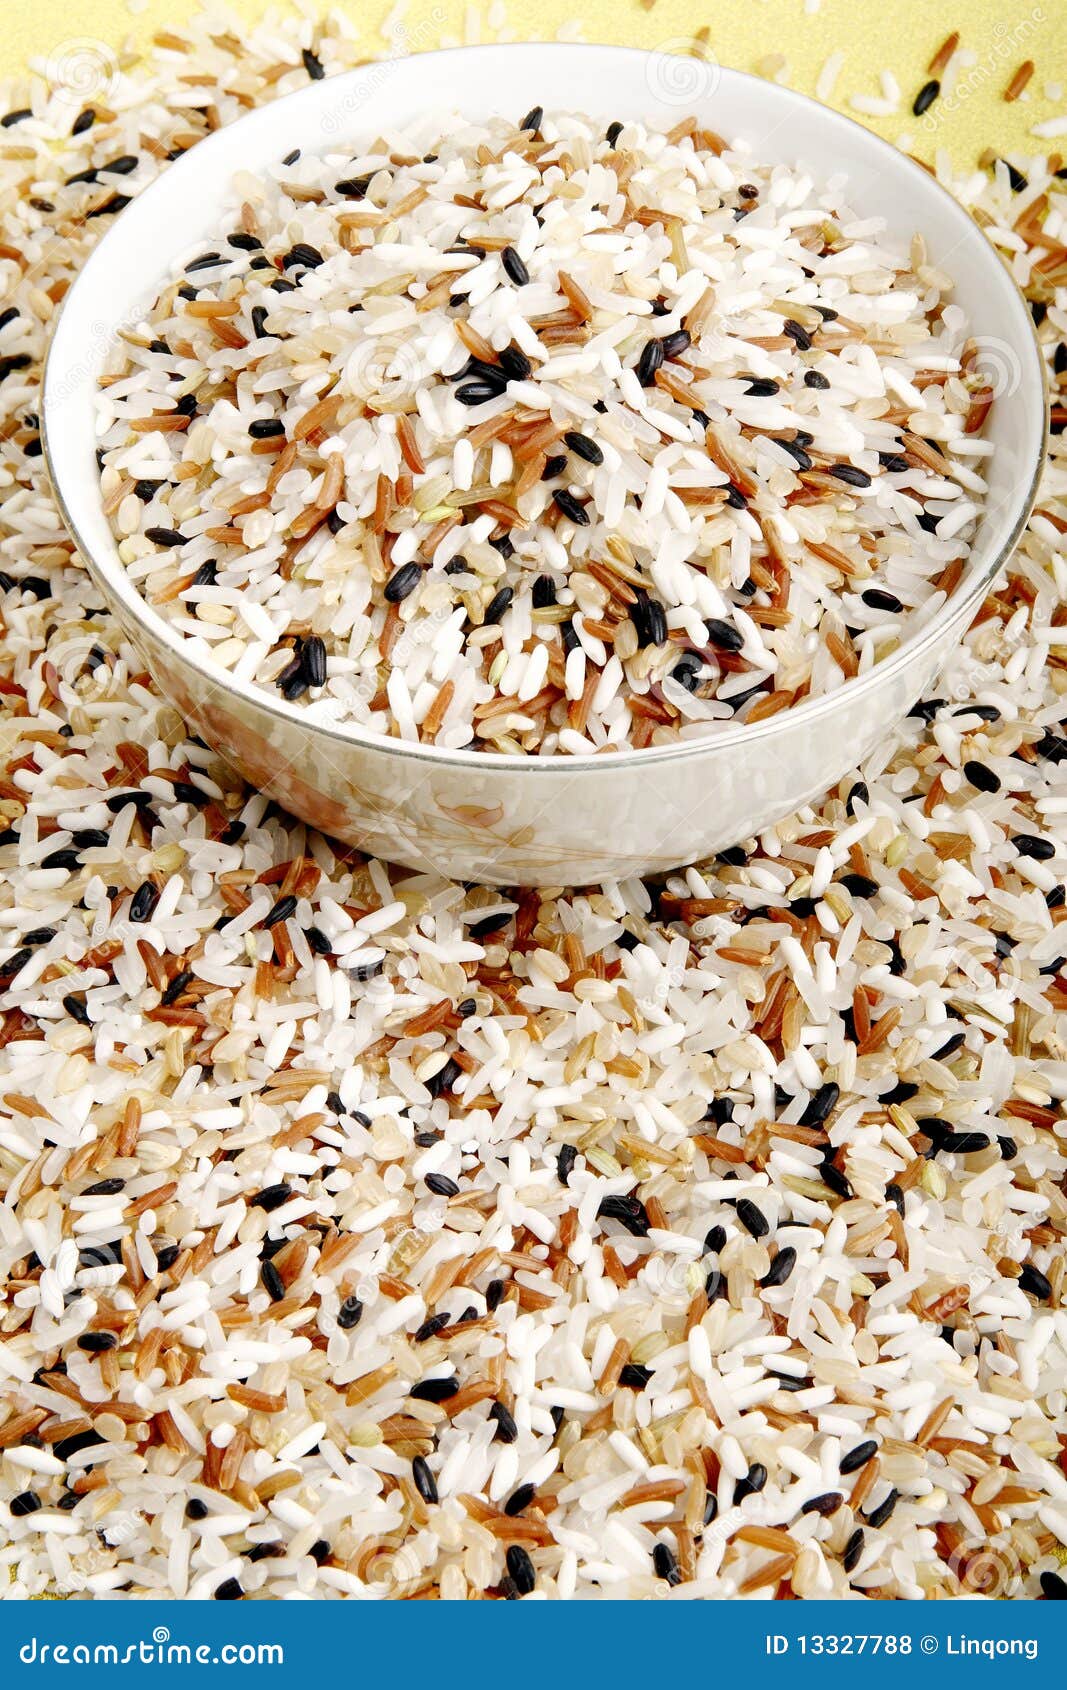 Blended rice stock photo. Image of glutinous, carbohydrates 13327788